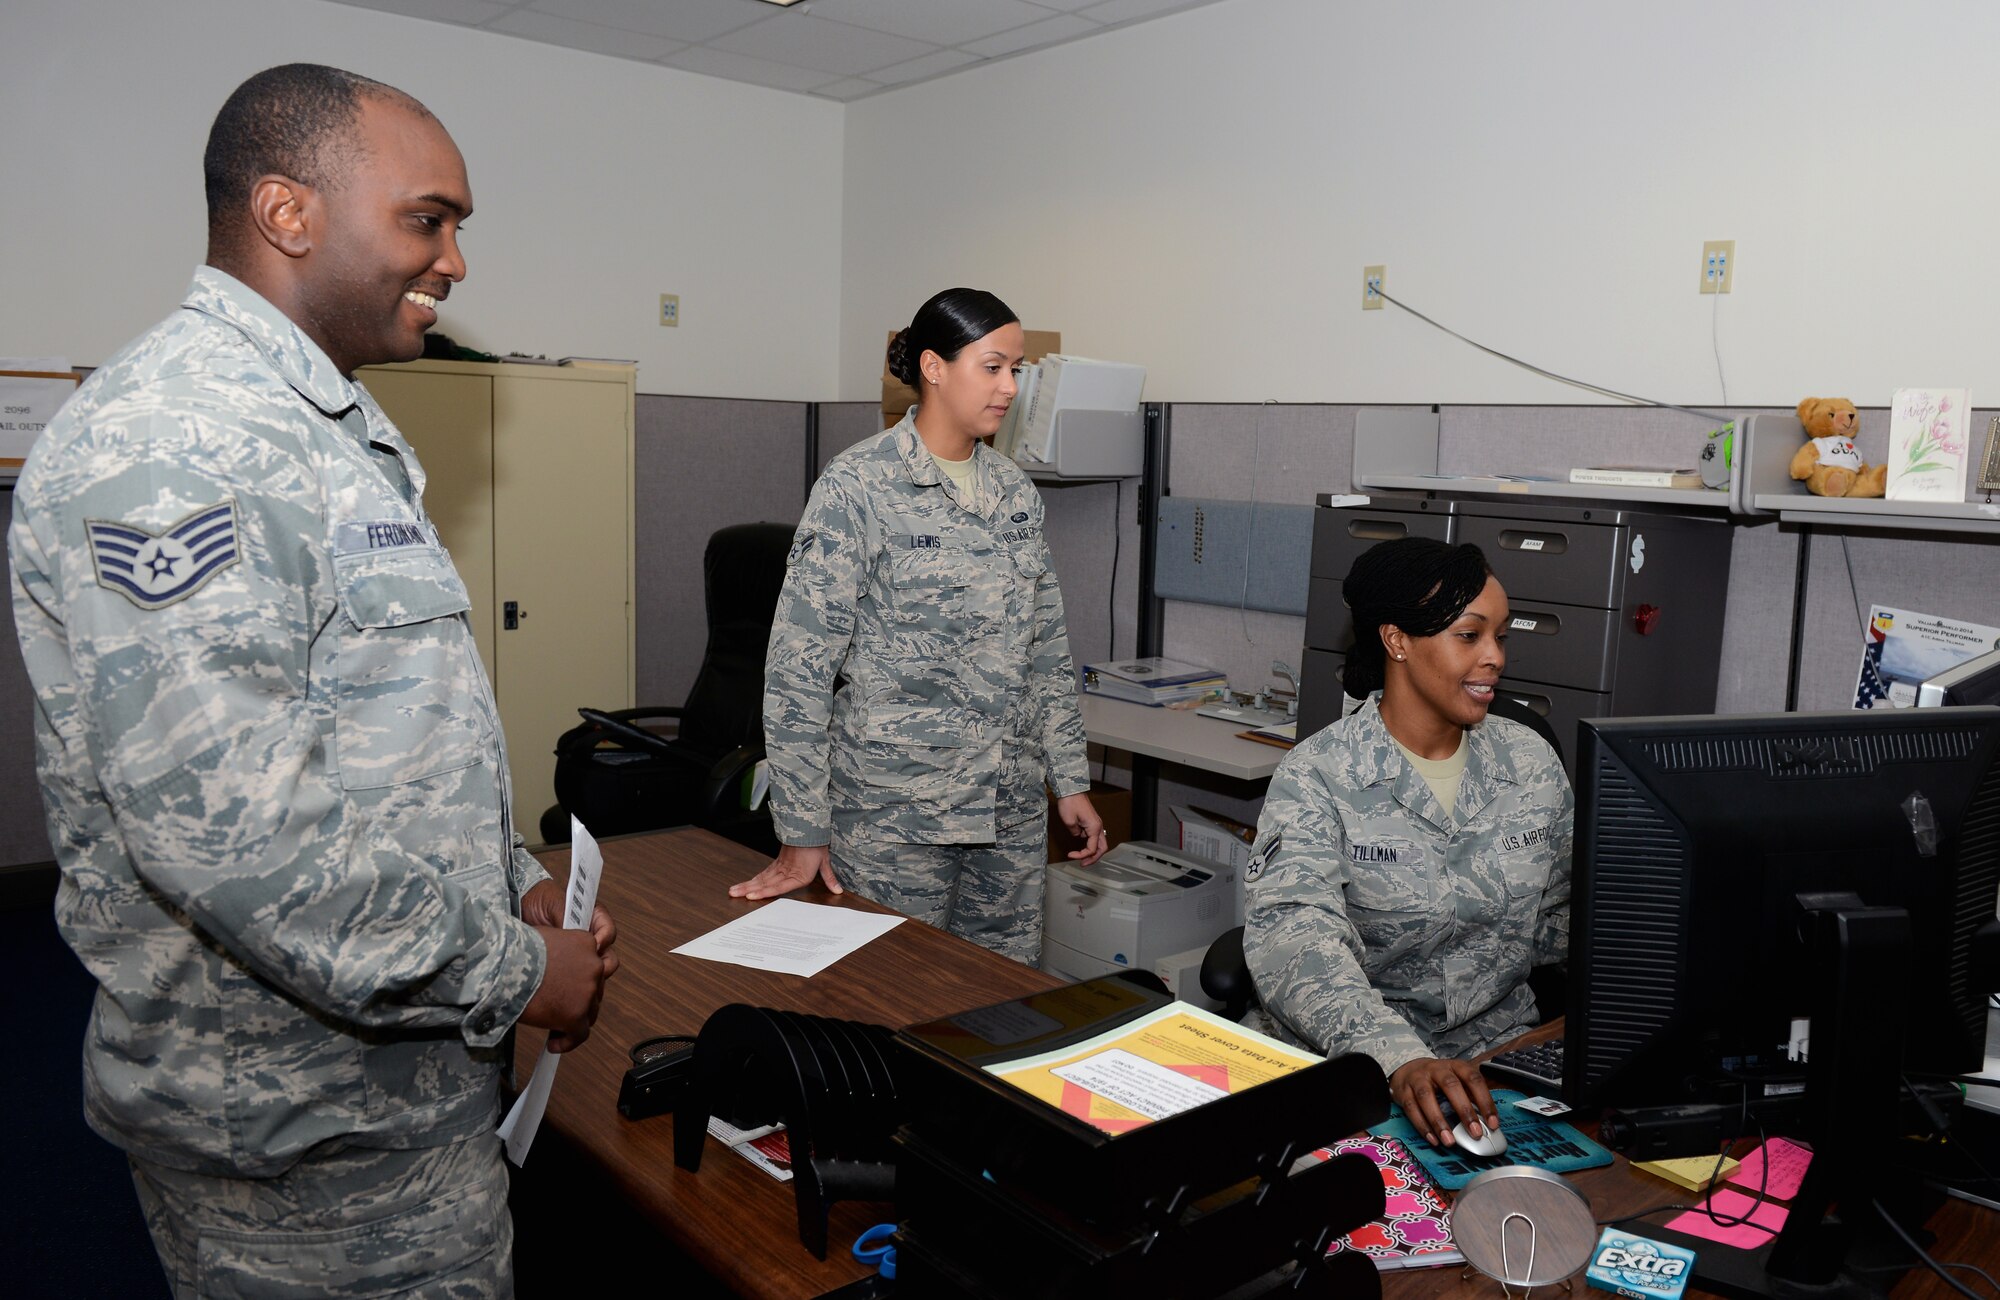 Airman 1st Class Vanessa Lewis and Airman 1st Class Aisha Tillman, 36th Force Support Squadron technicians, assist Staff Sgt. Robinson Ferdinand, 36th Civil Engineer Squadron, with updating his records Sept. 9, 2015, at Andersen Air Force Base, Guam. The awards and decorations office ensures achievements are rightfully given to service members and updates their records for career progression. (U.S. Air Force photo by Airman 1st Class Arielle Vasquez/Released)